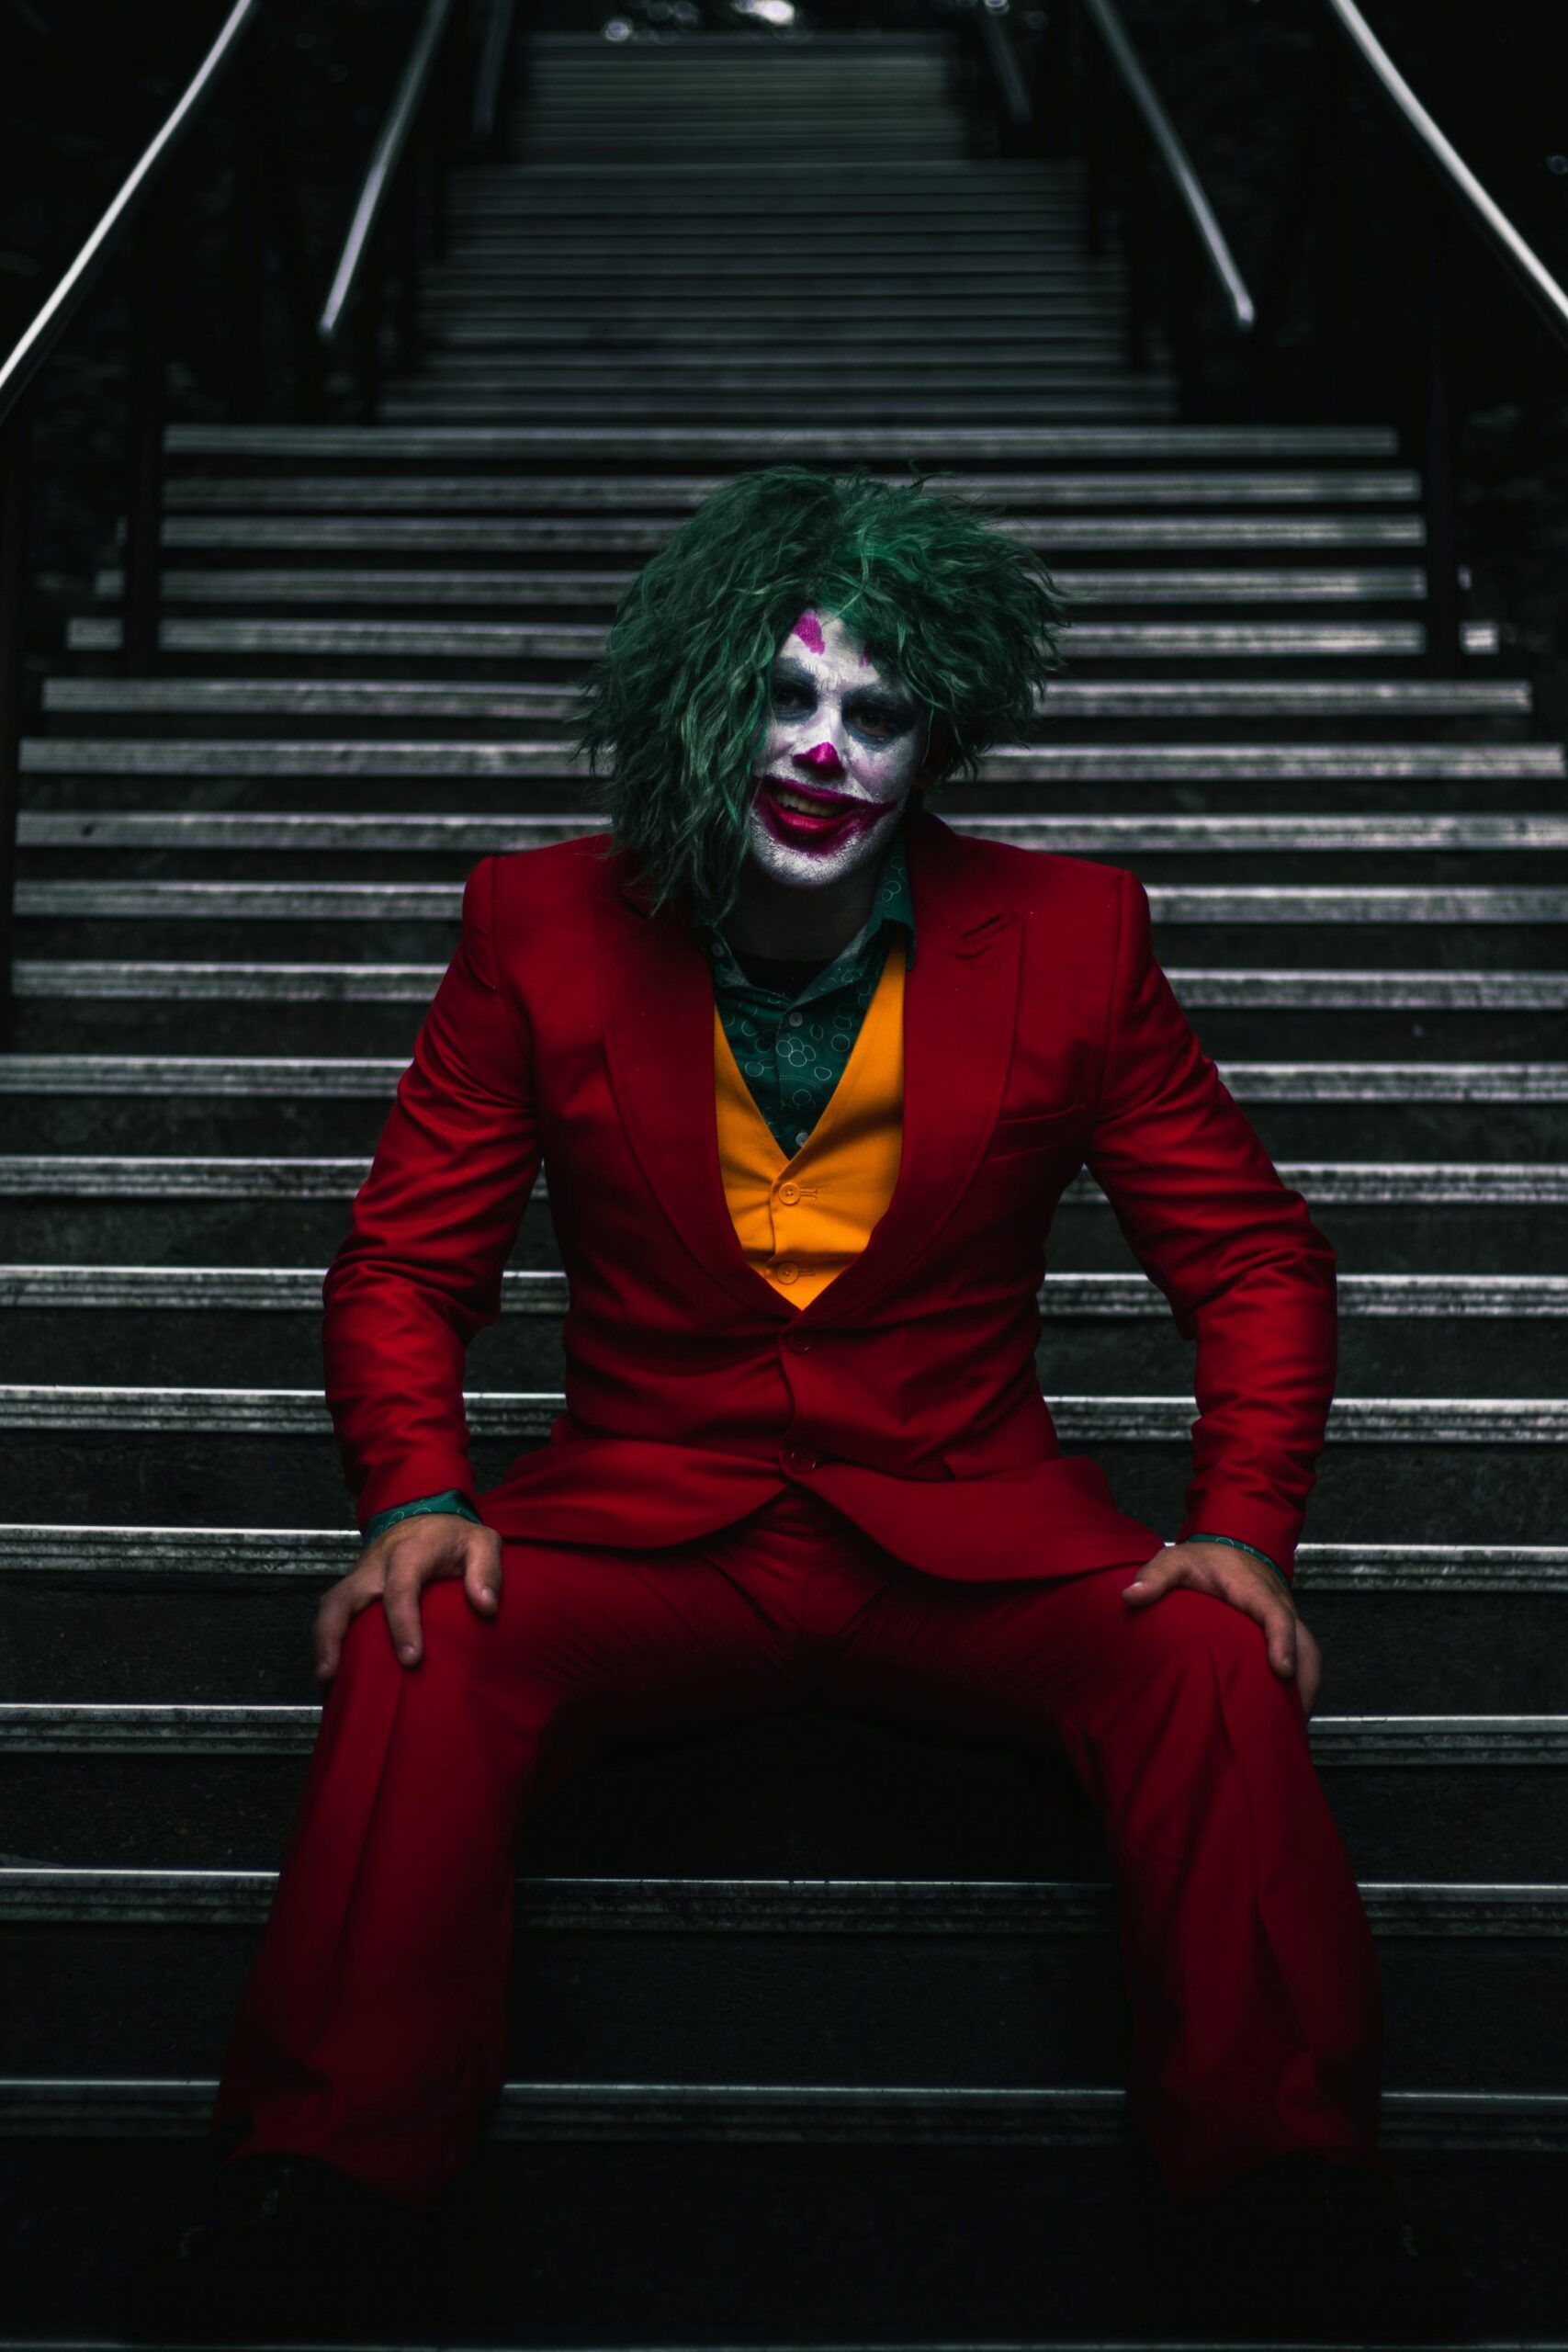 An image of a man dressed in the Joker costume.